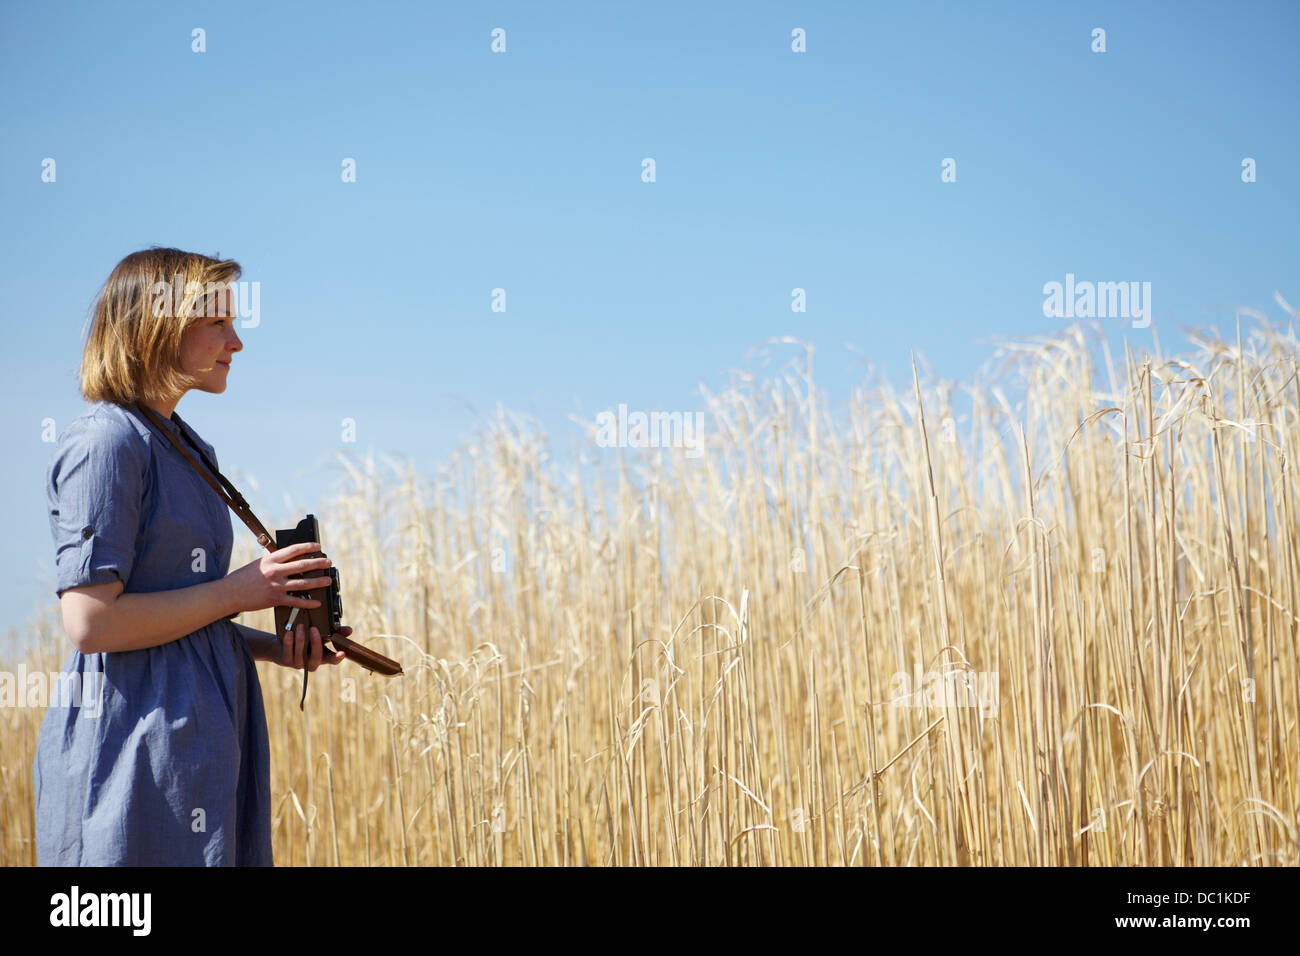 Young woman photographing reeds Stock Photo